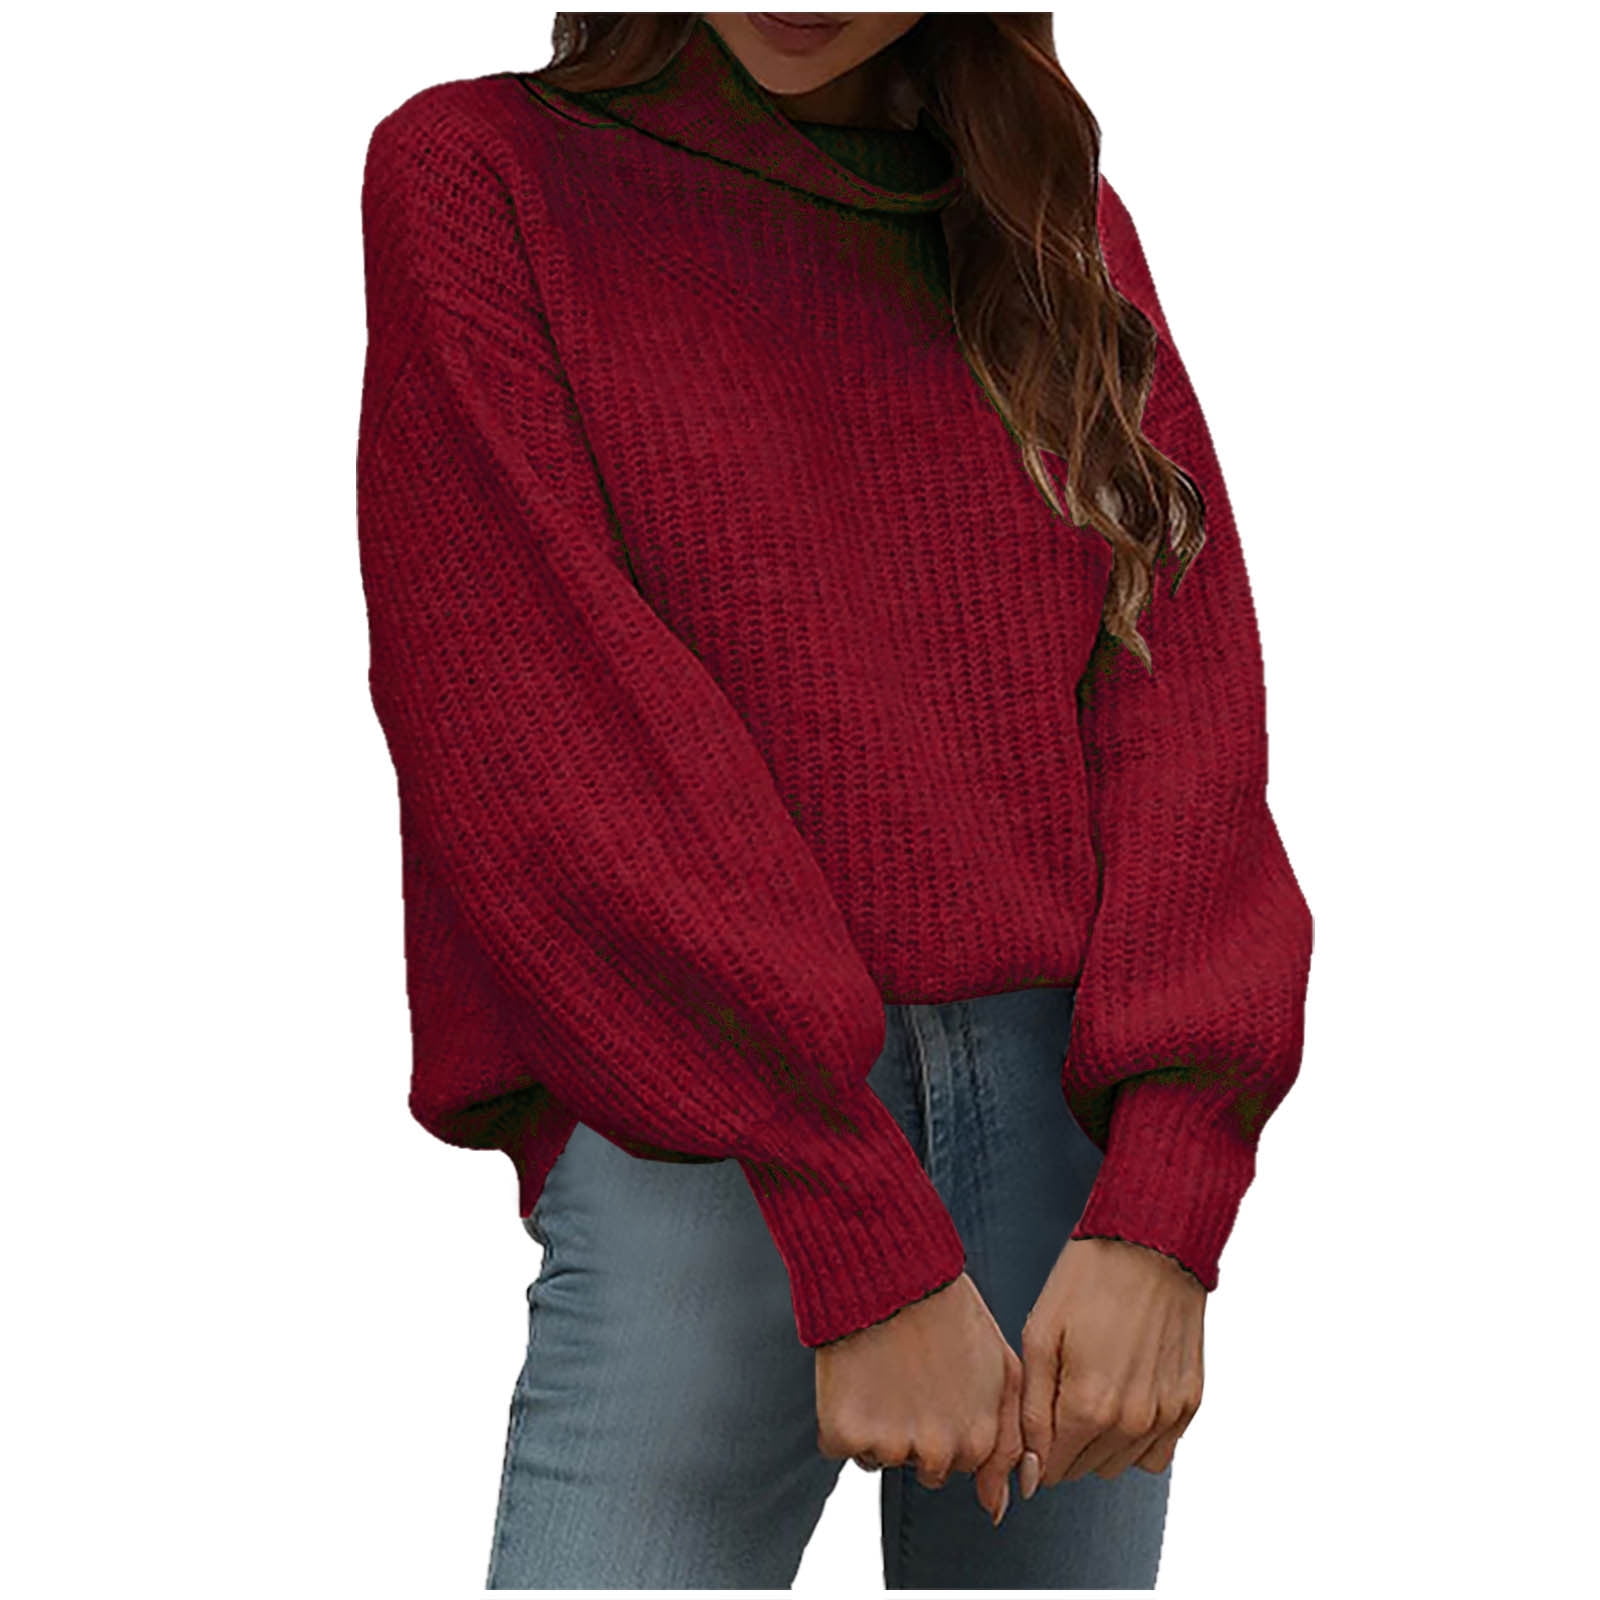 Women's Turtleneck Ribbed Knit Sweater Long Sleeve Solid Fall Winter ...